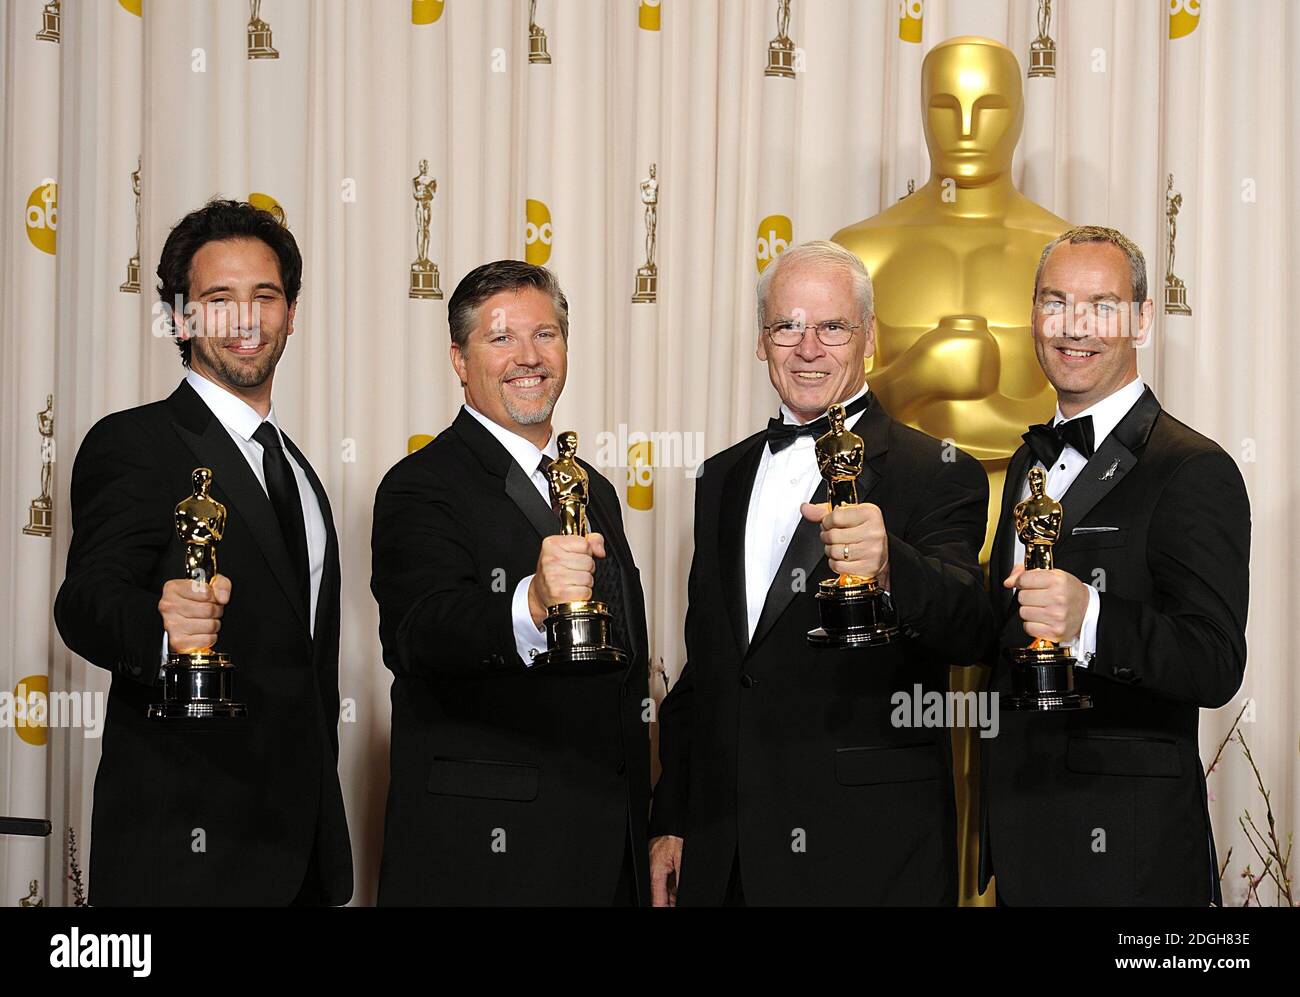 Guillaume Rocheron, Bill Westenhofer, Donald R Elliot and Erik-Jan De Boer with the Oscar for Achievement in Visual Effects received for Life of Pi at the 85th Academy Awards at the Dolby Theatre, Los Angeles. Stock Photo